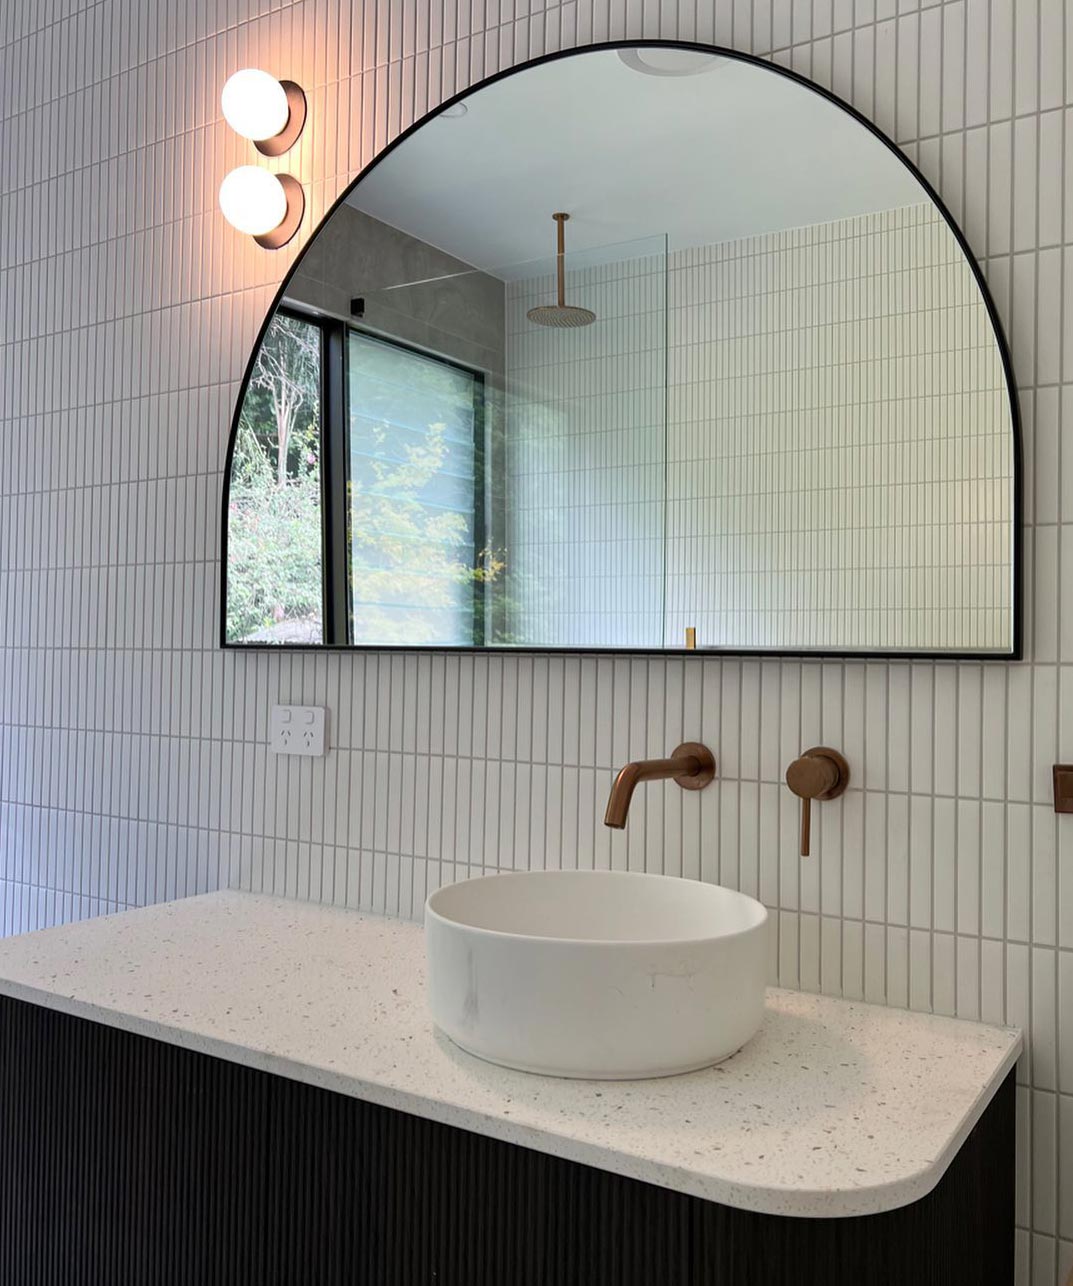 Bathroom with two round lights